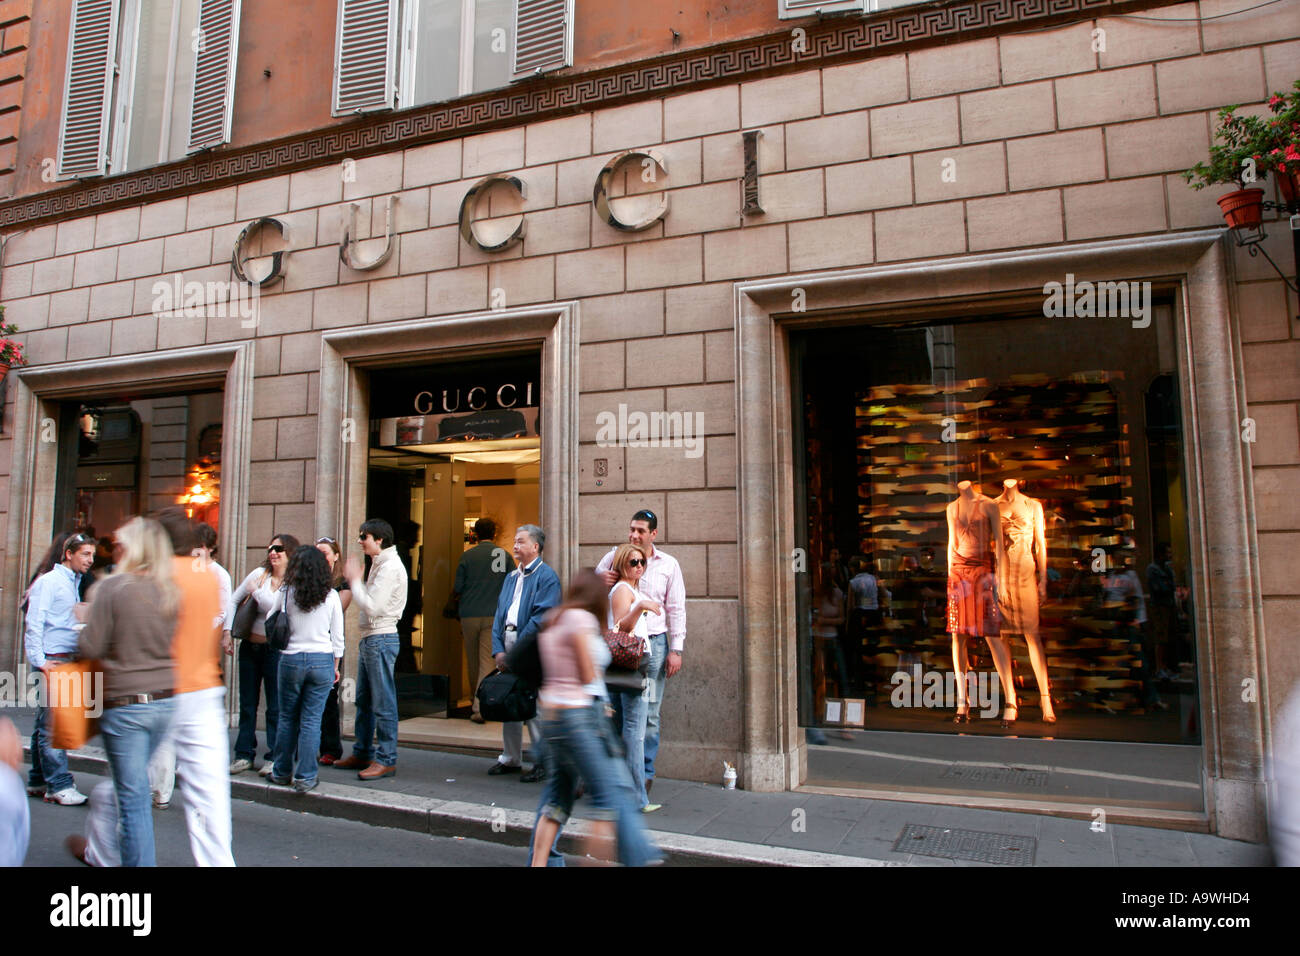 Gucci Store In Rome Italy High Resolution Stock Photography and Images -  Alamy